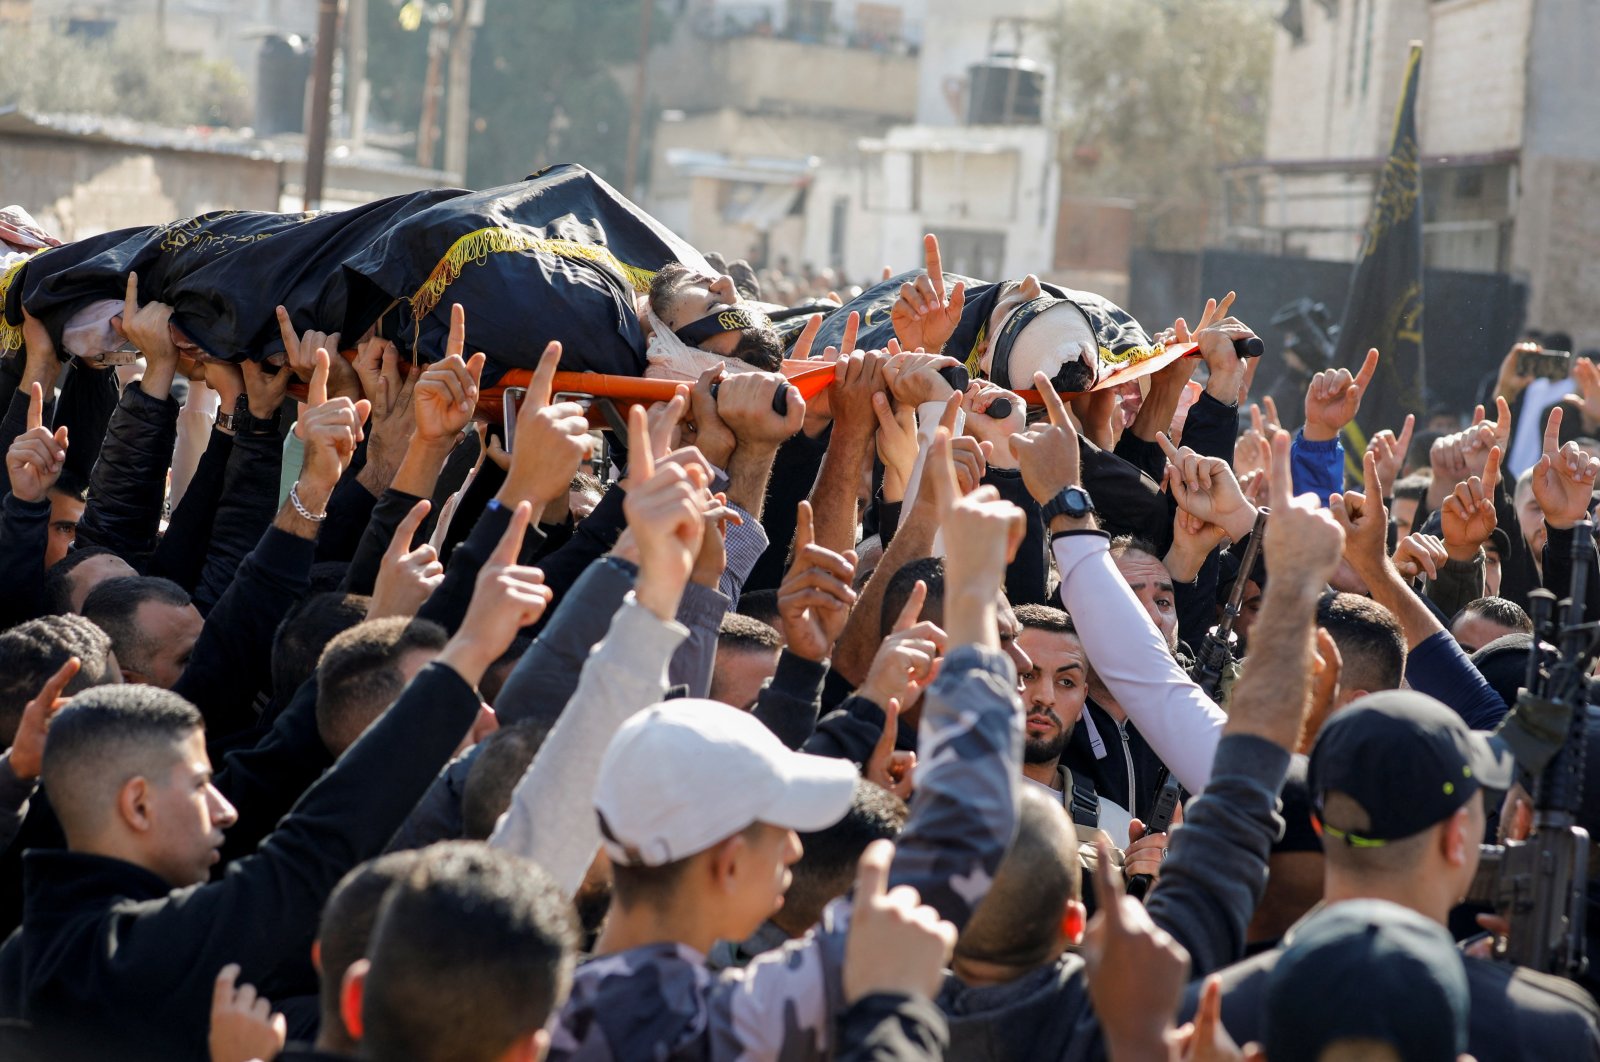 Mourners attend the funeral of two Palestinians killed by Israeli forces, Jenin, Israeli-occupied West Bank, Dec. 1, 2022. (Reuters Photo)